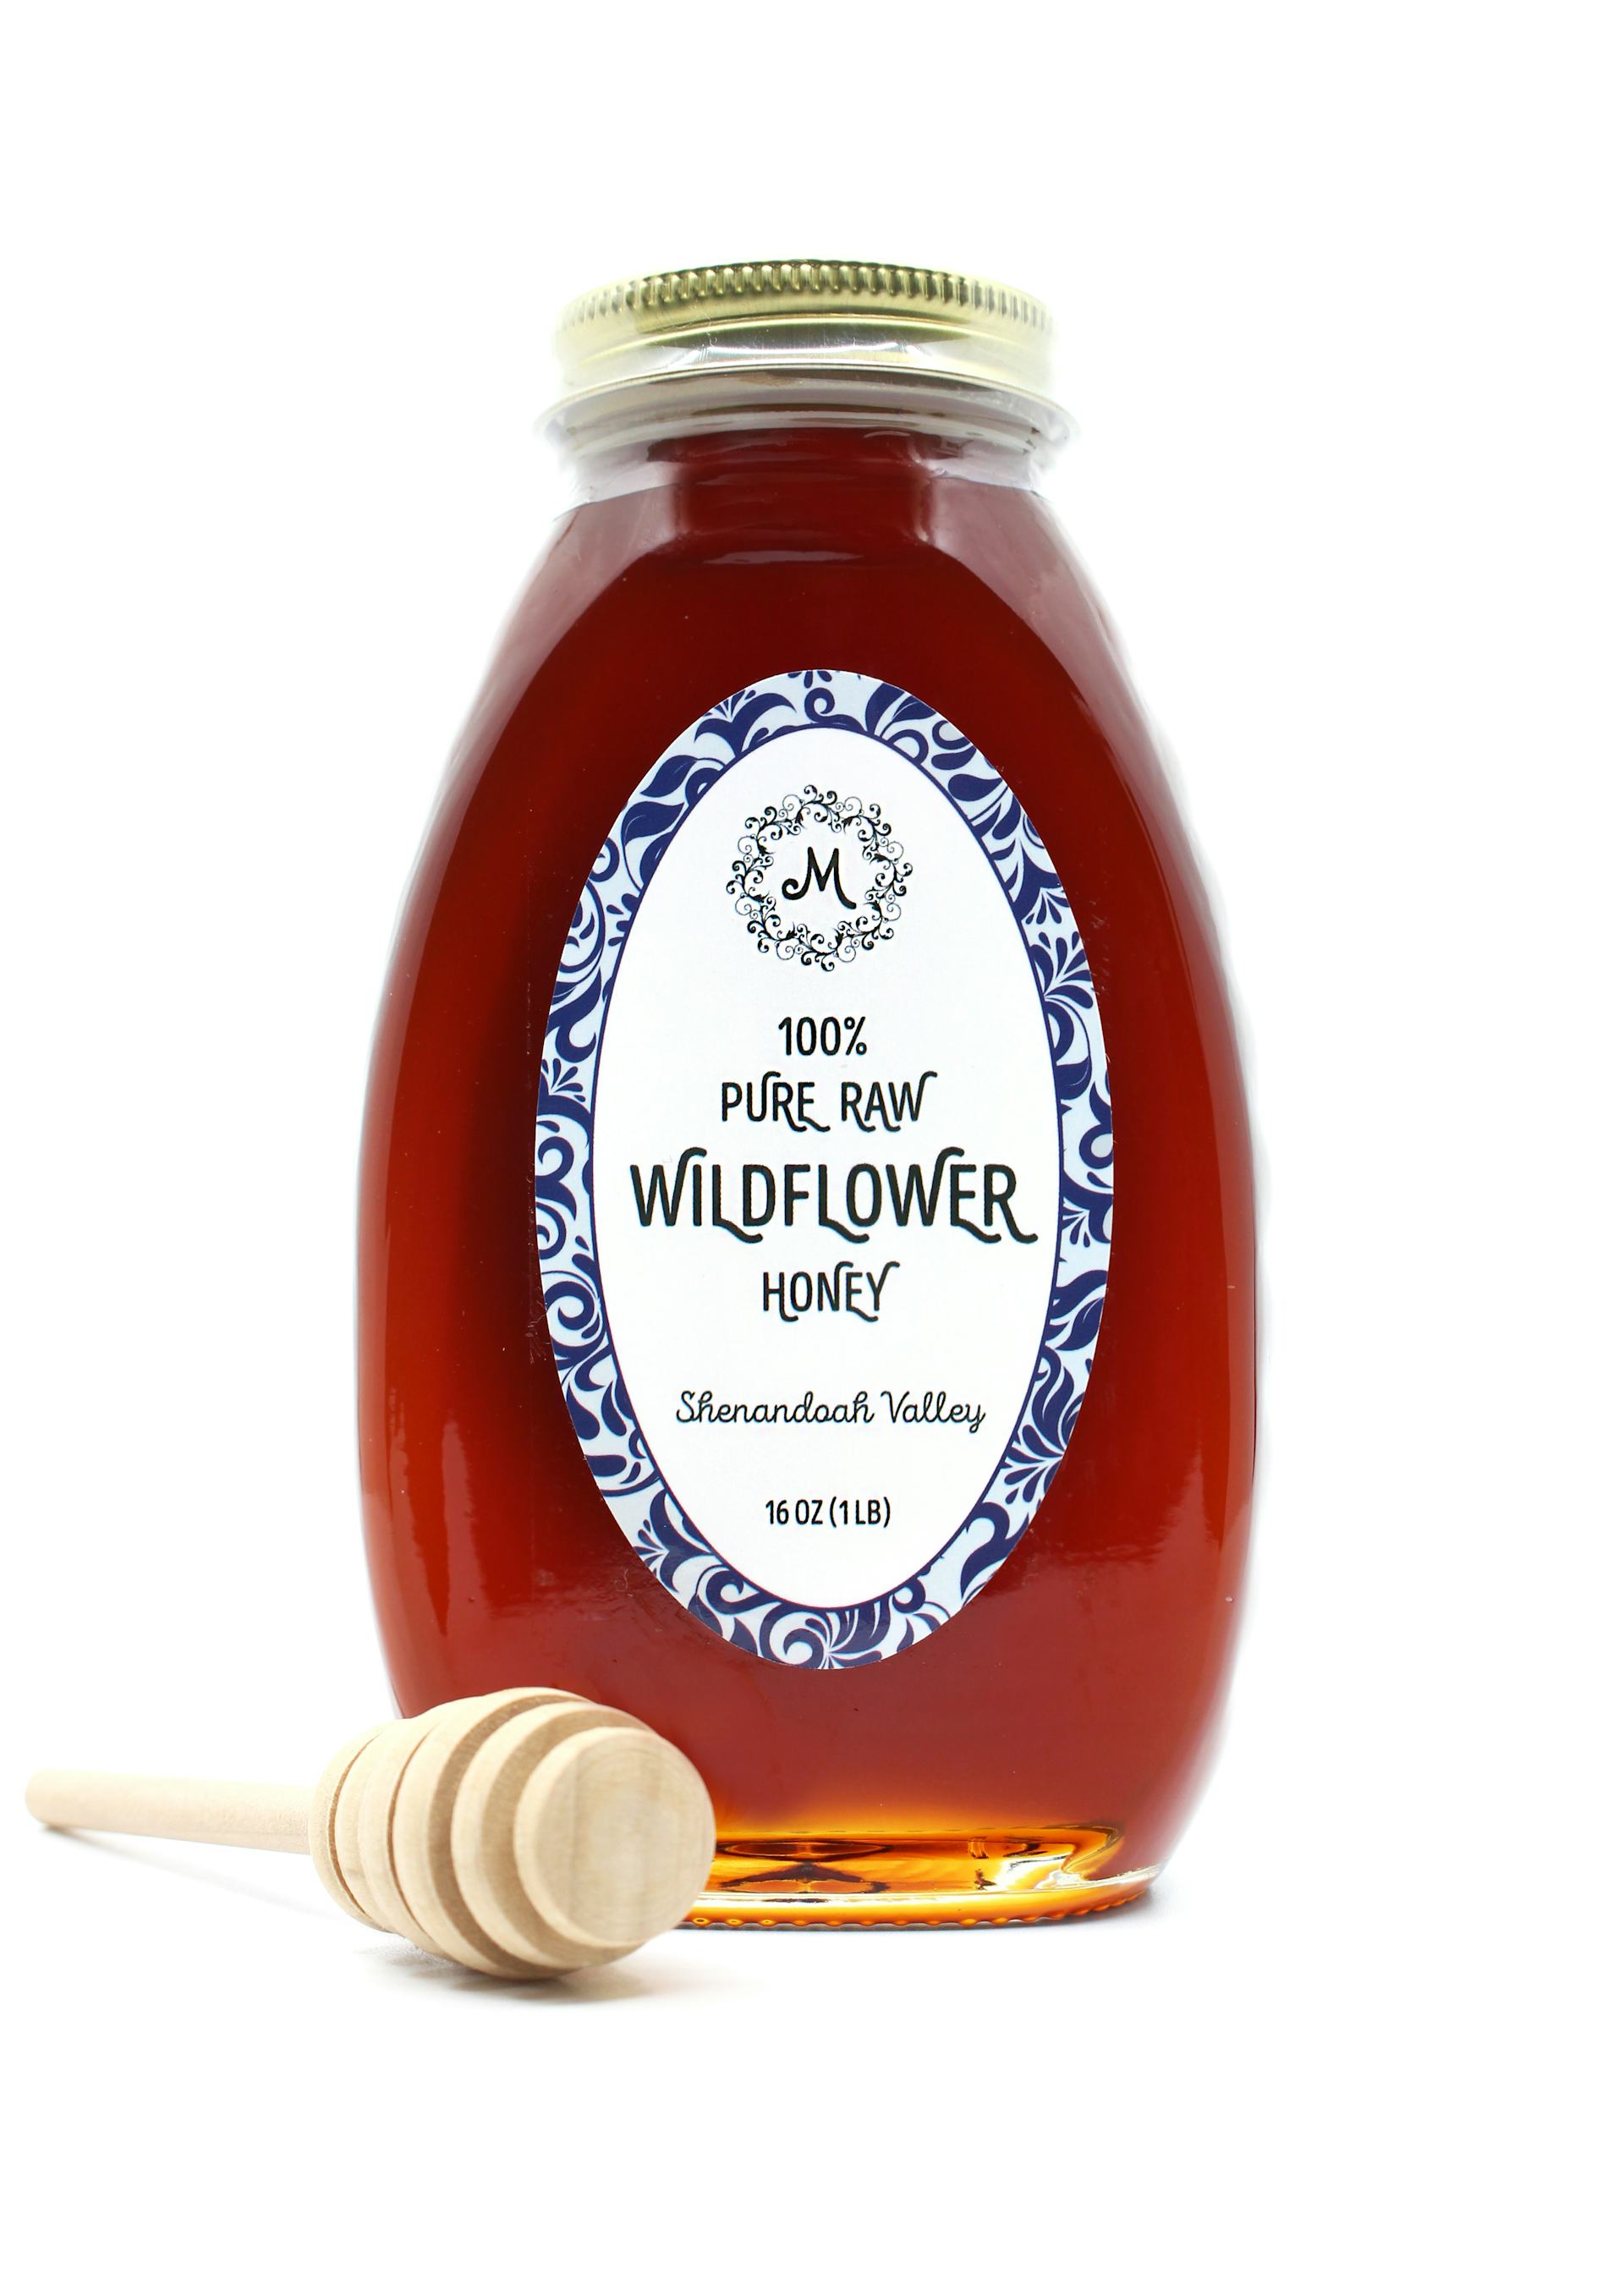 Wildflower or Clover Honey with Honey Dipper